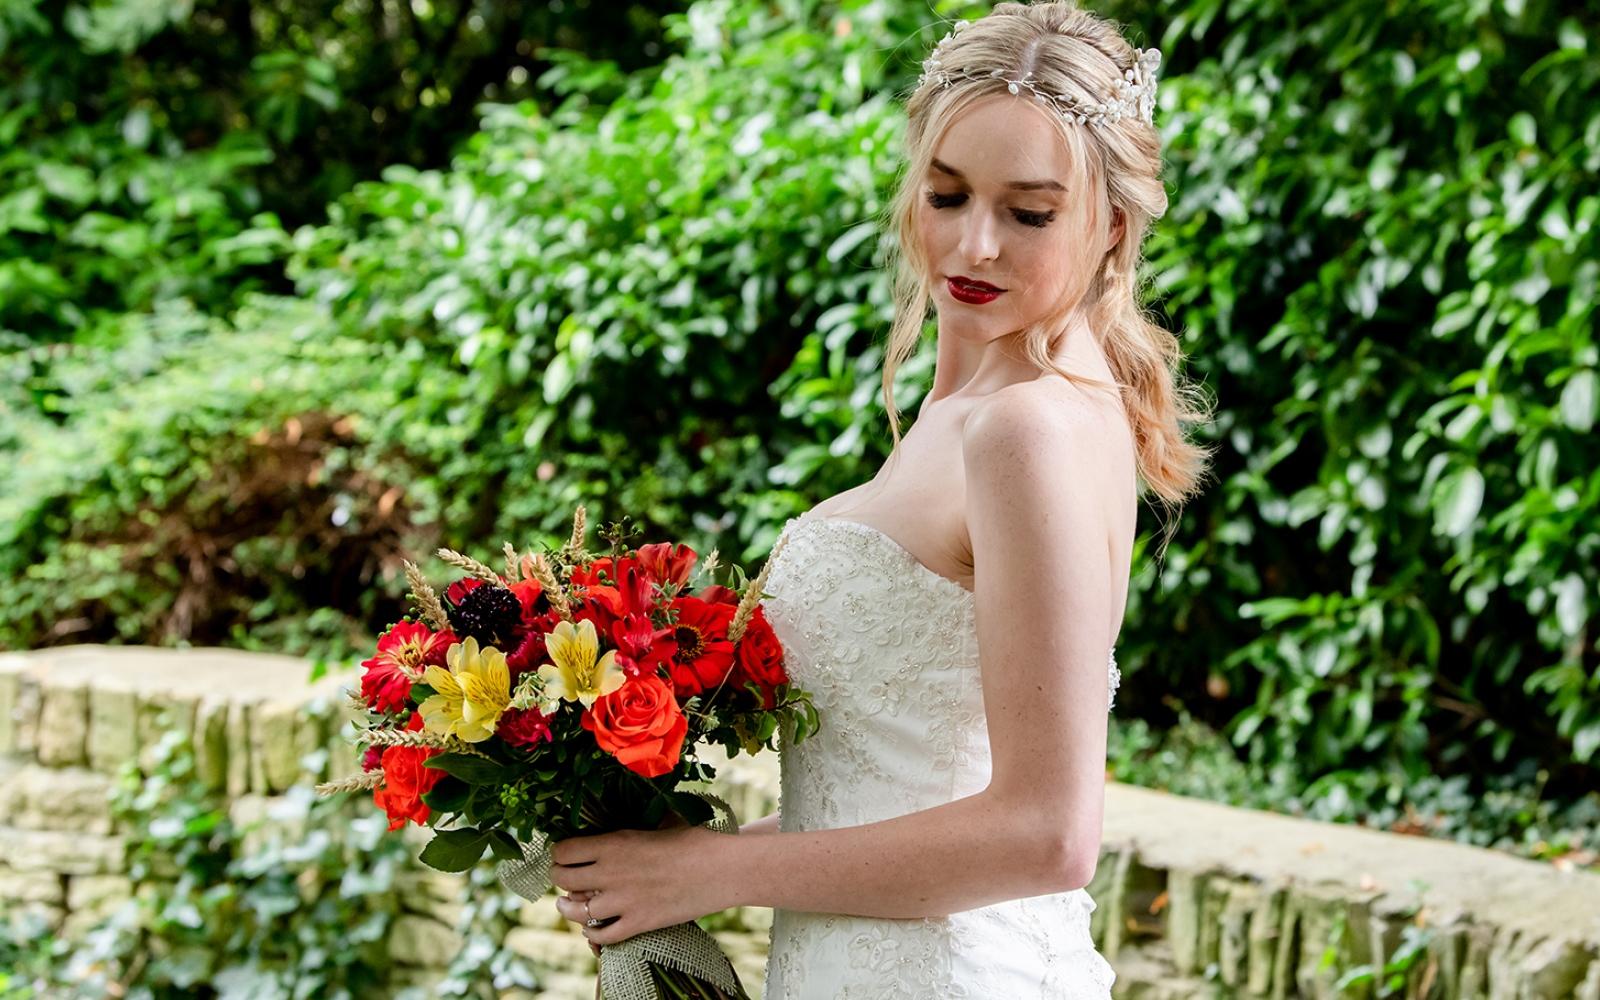 Make Up By Carissa makeup artist Cirencester Gloucestershire cruelty free make-up styled shoot Stratton House Cotswold autumnal bridal bouquet fitted wedding dress